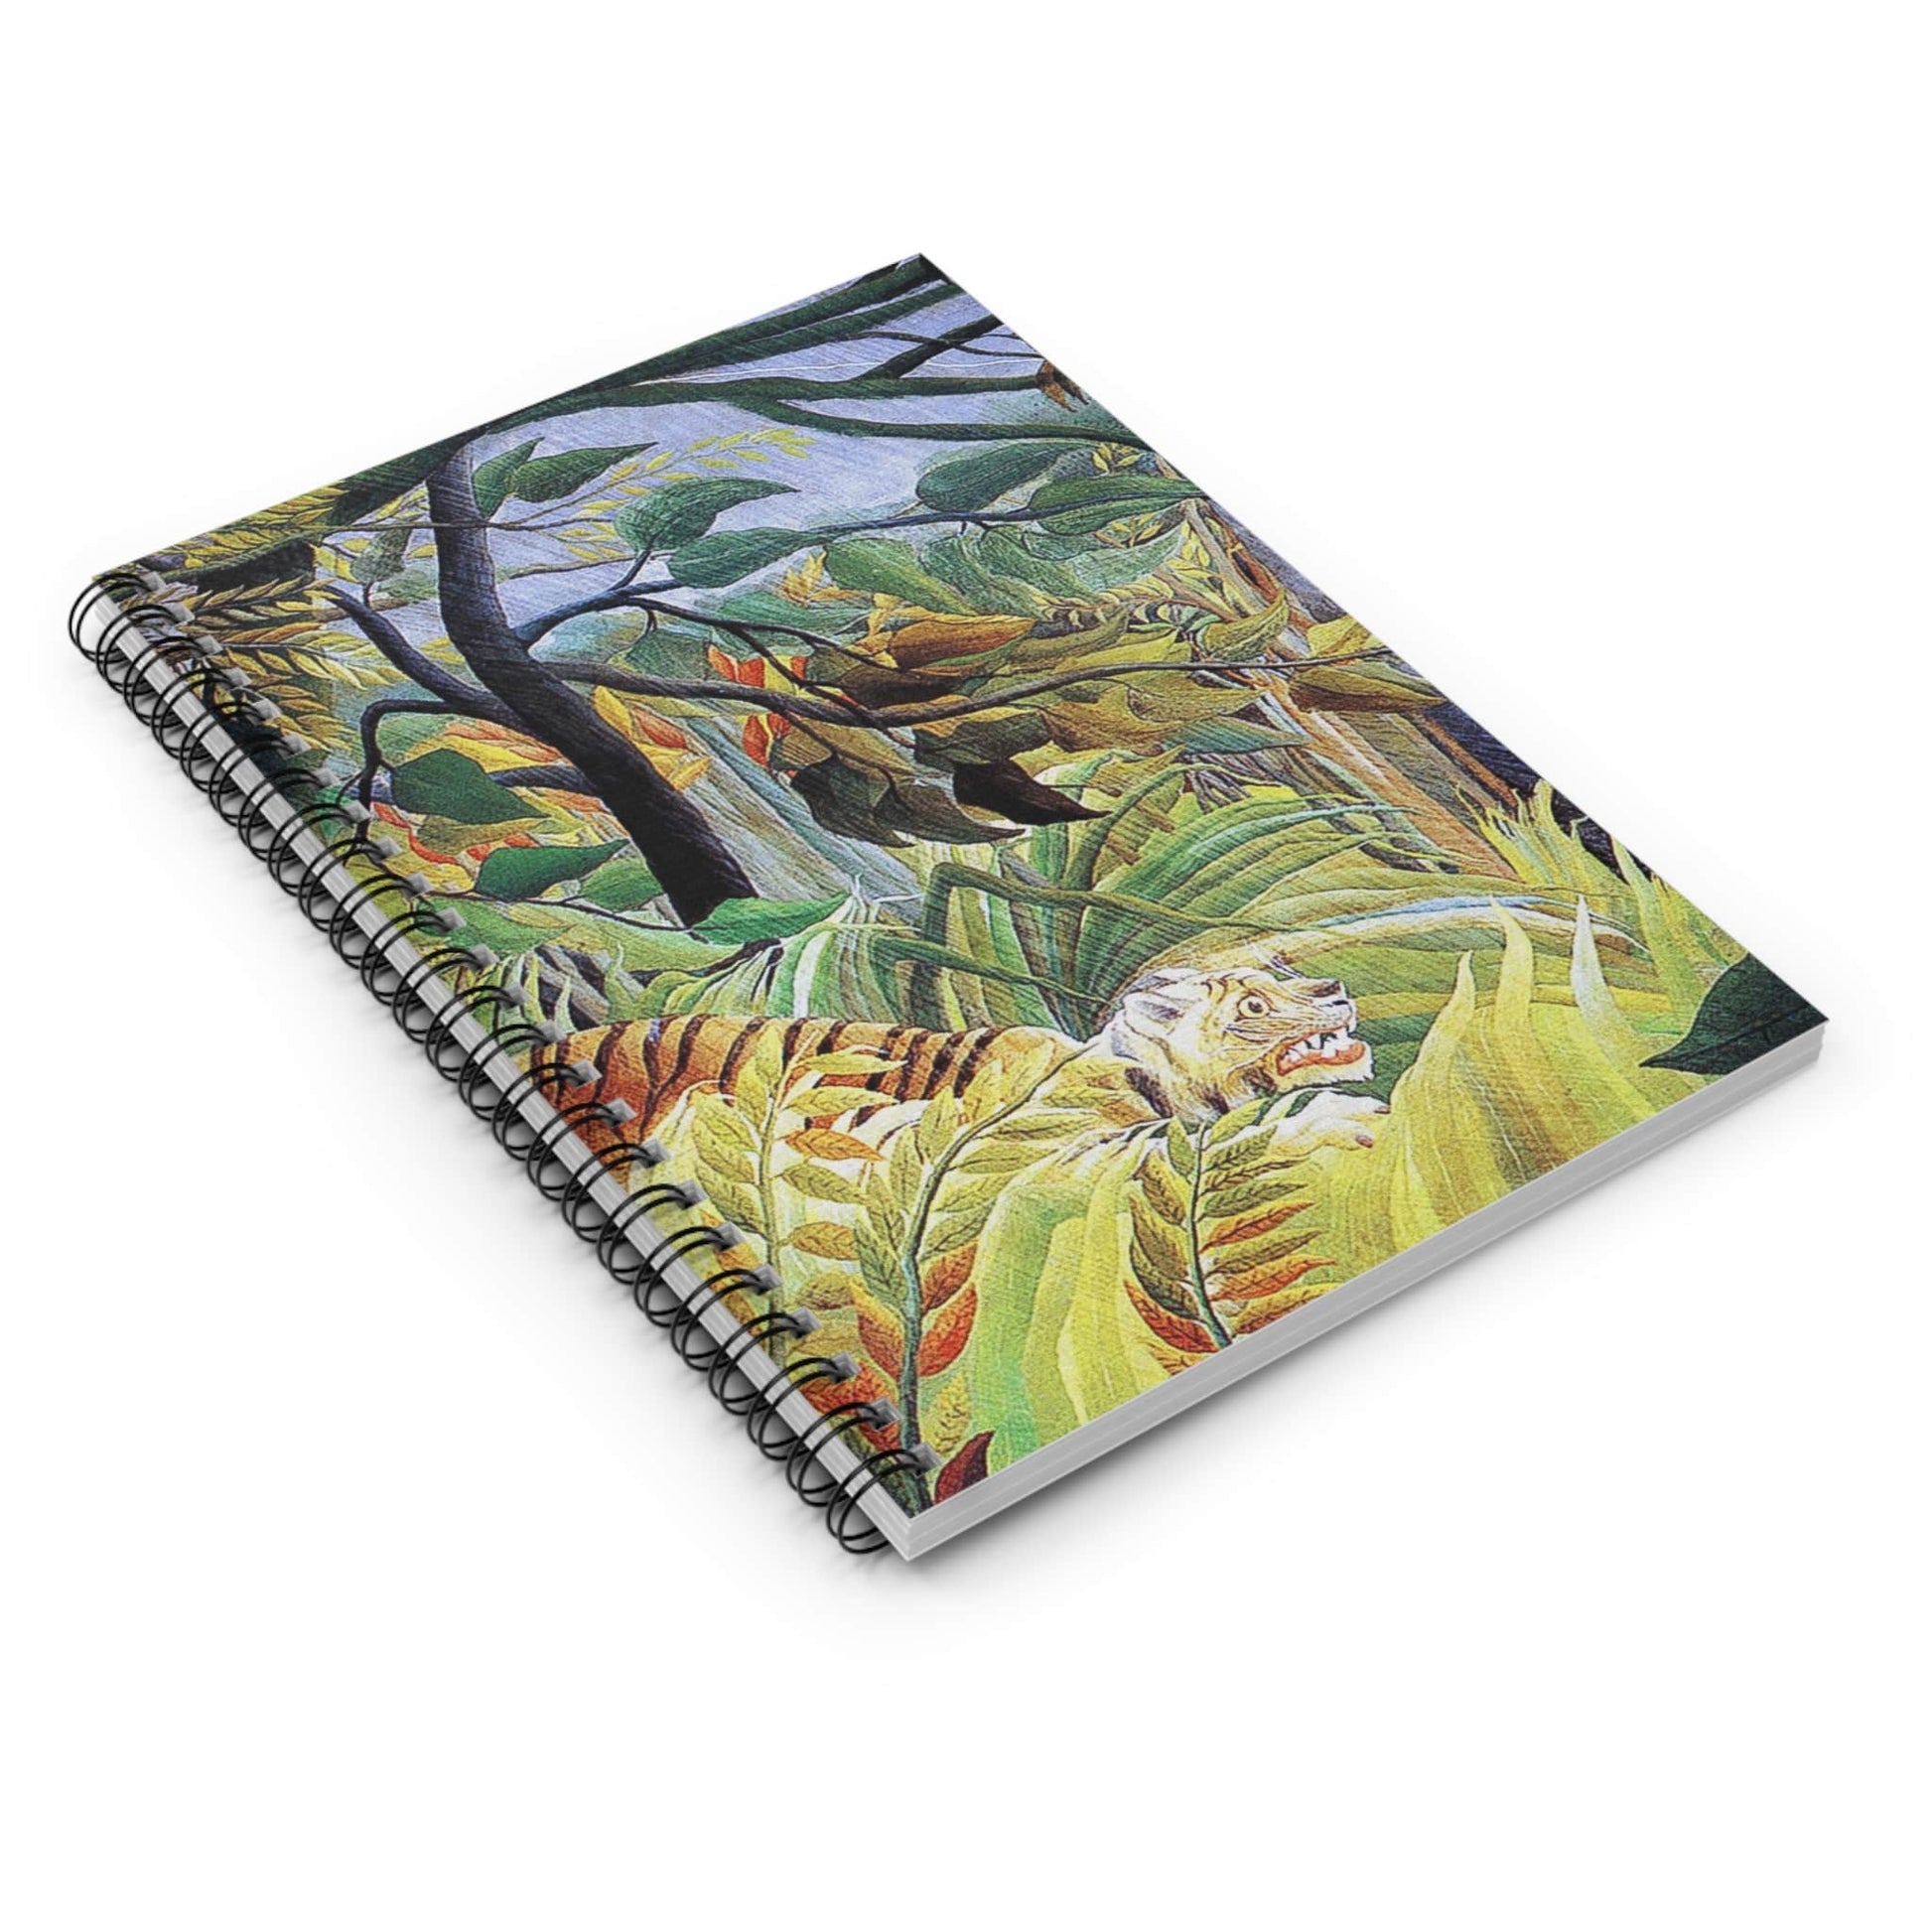 Jungle Landscape Spiral Notebook Laying Flat on White Surface